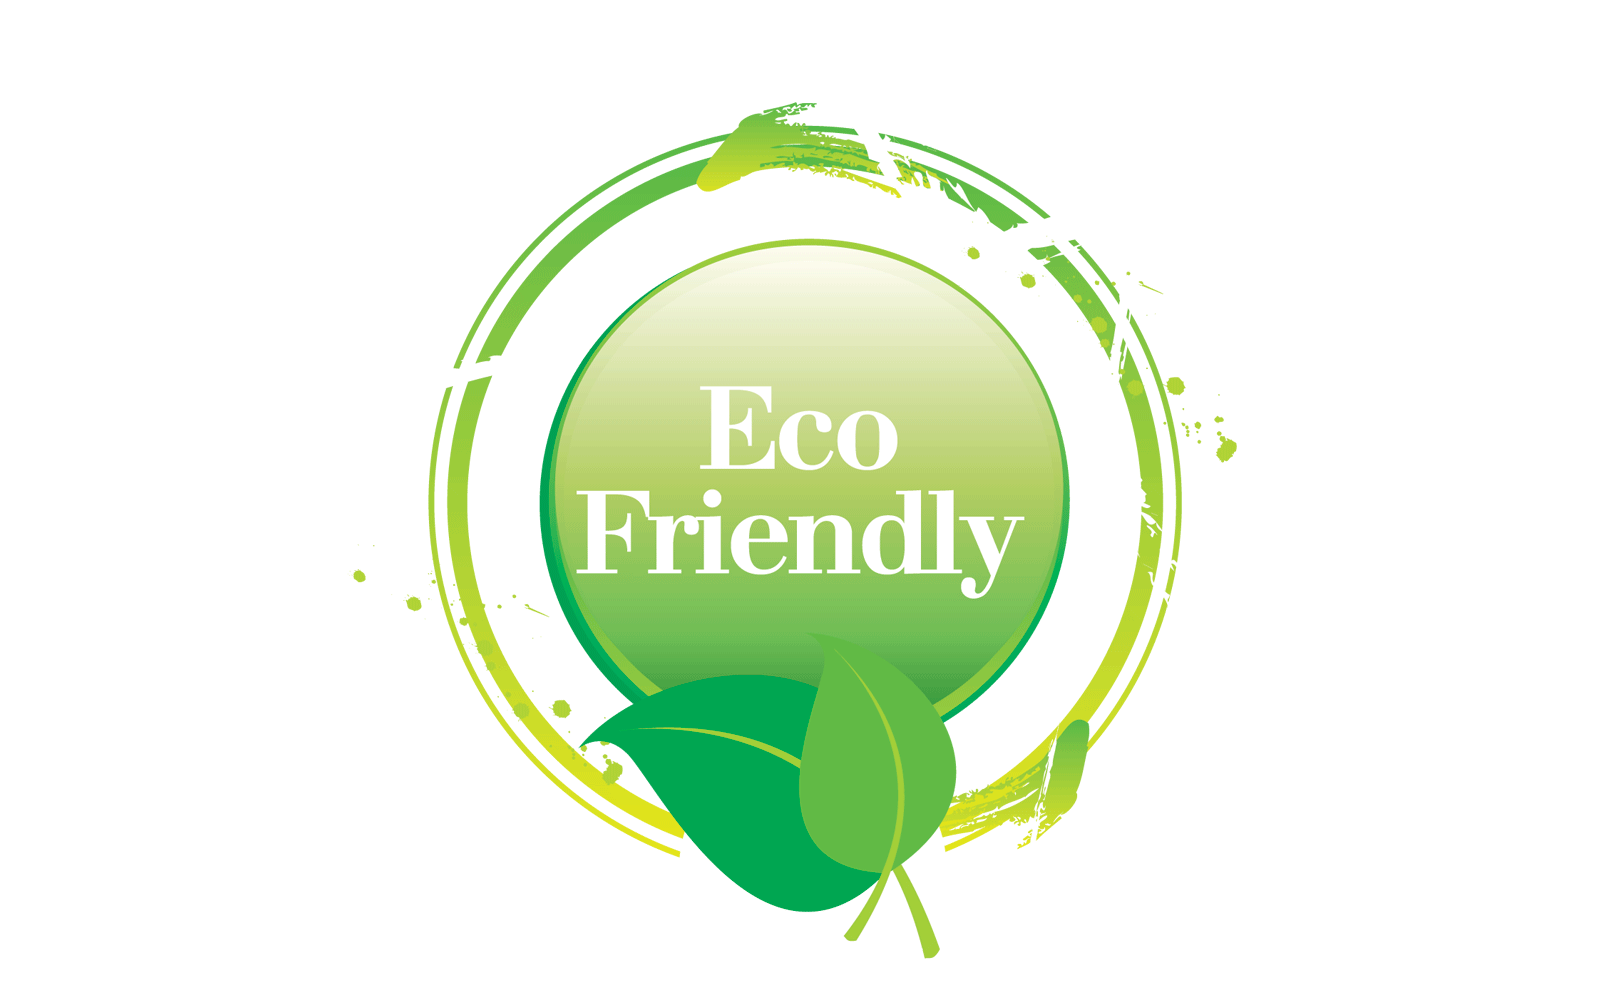 The Opaque eco-responsible